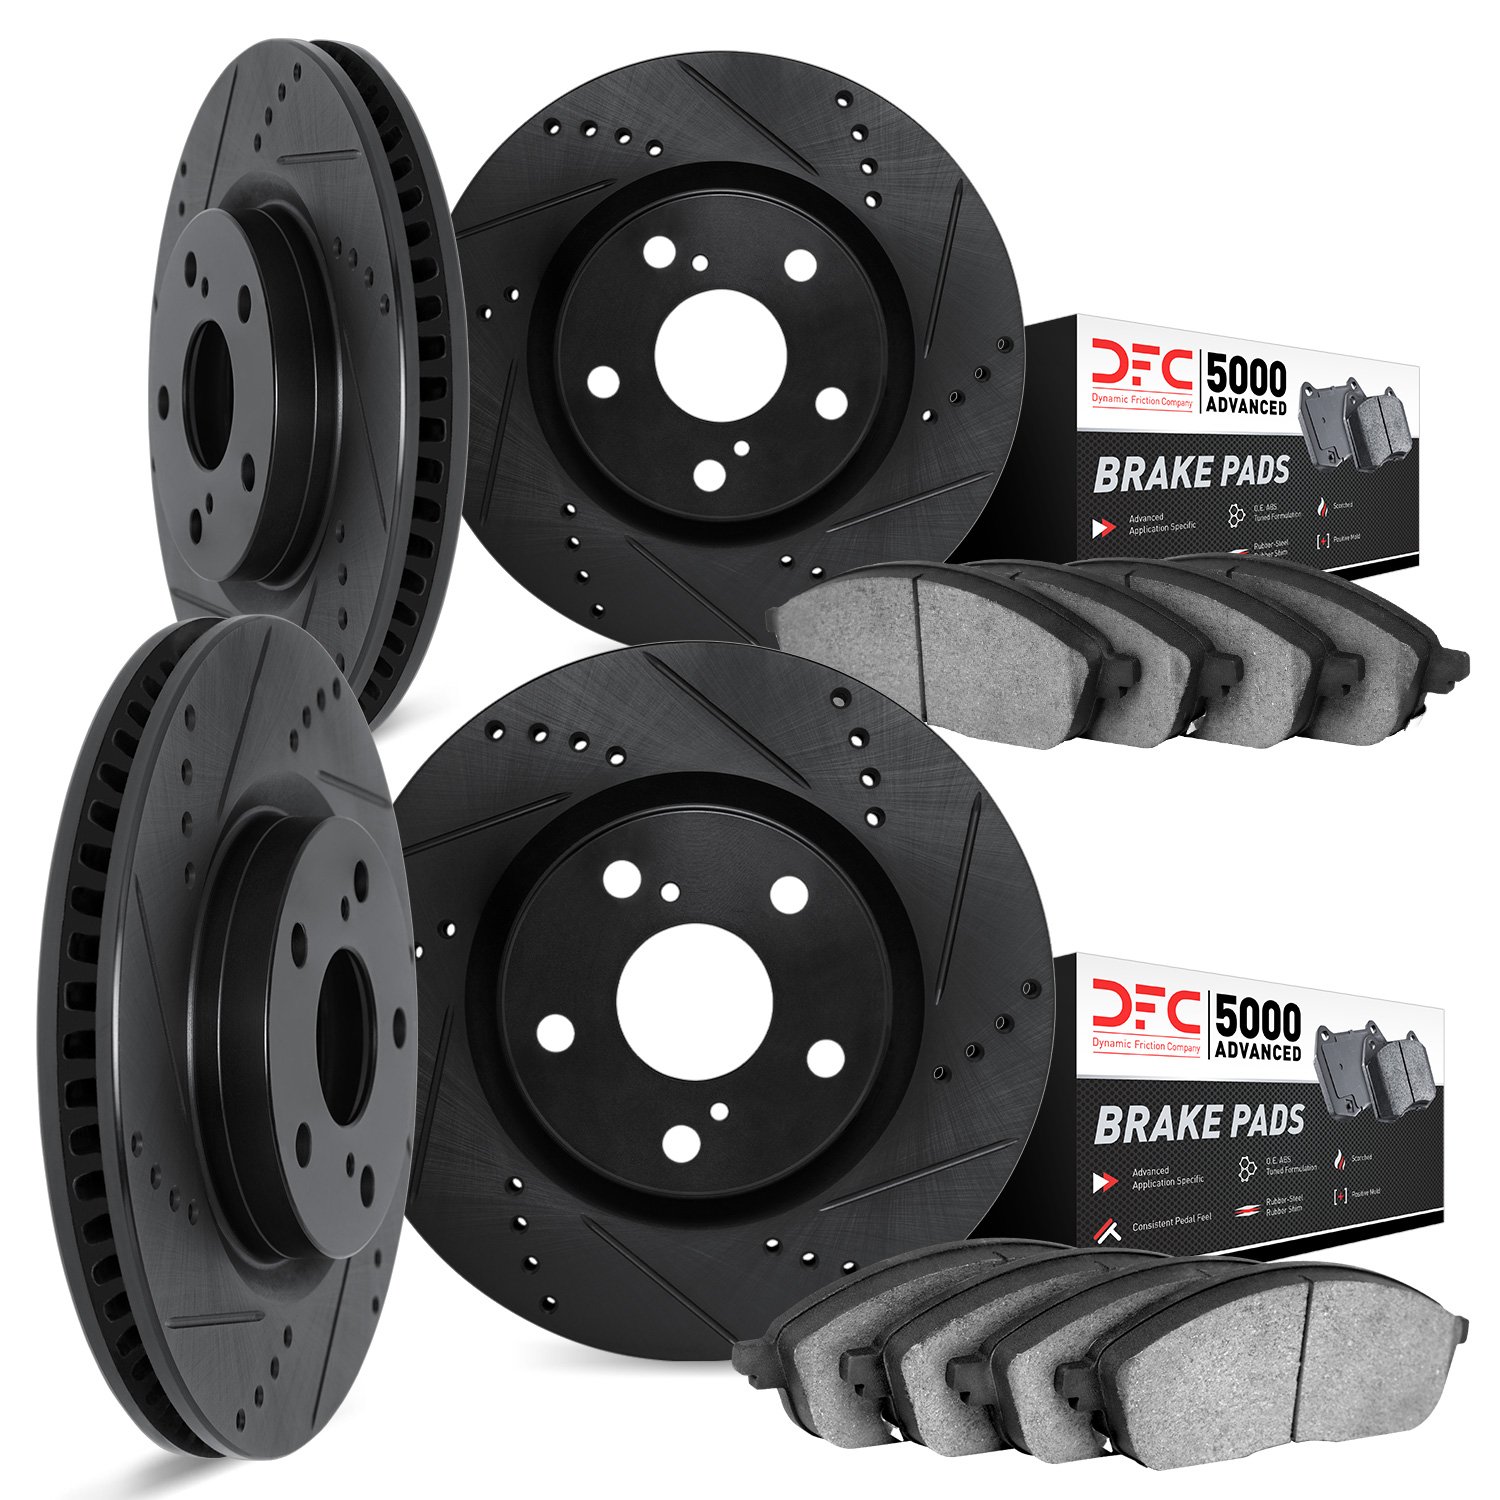 8504-31038 Drilled/Slotted Brake Rotors w/5000 Advanced Brake Pads Kit [Black], 2016-2019 BMW, Position: Front and Rear